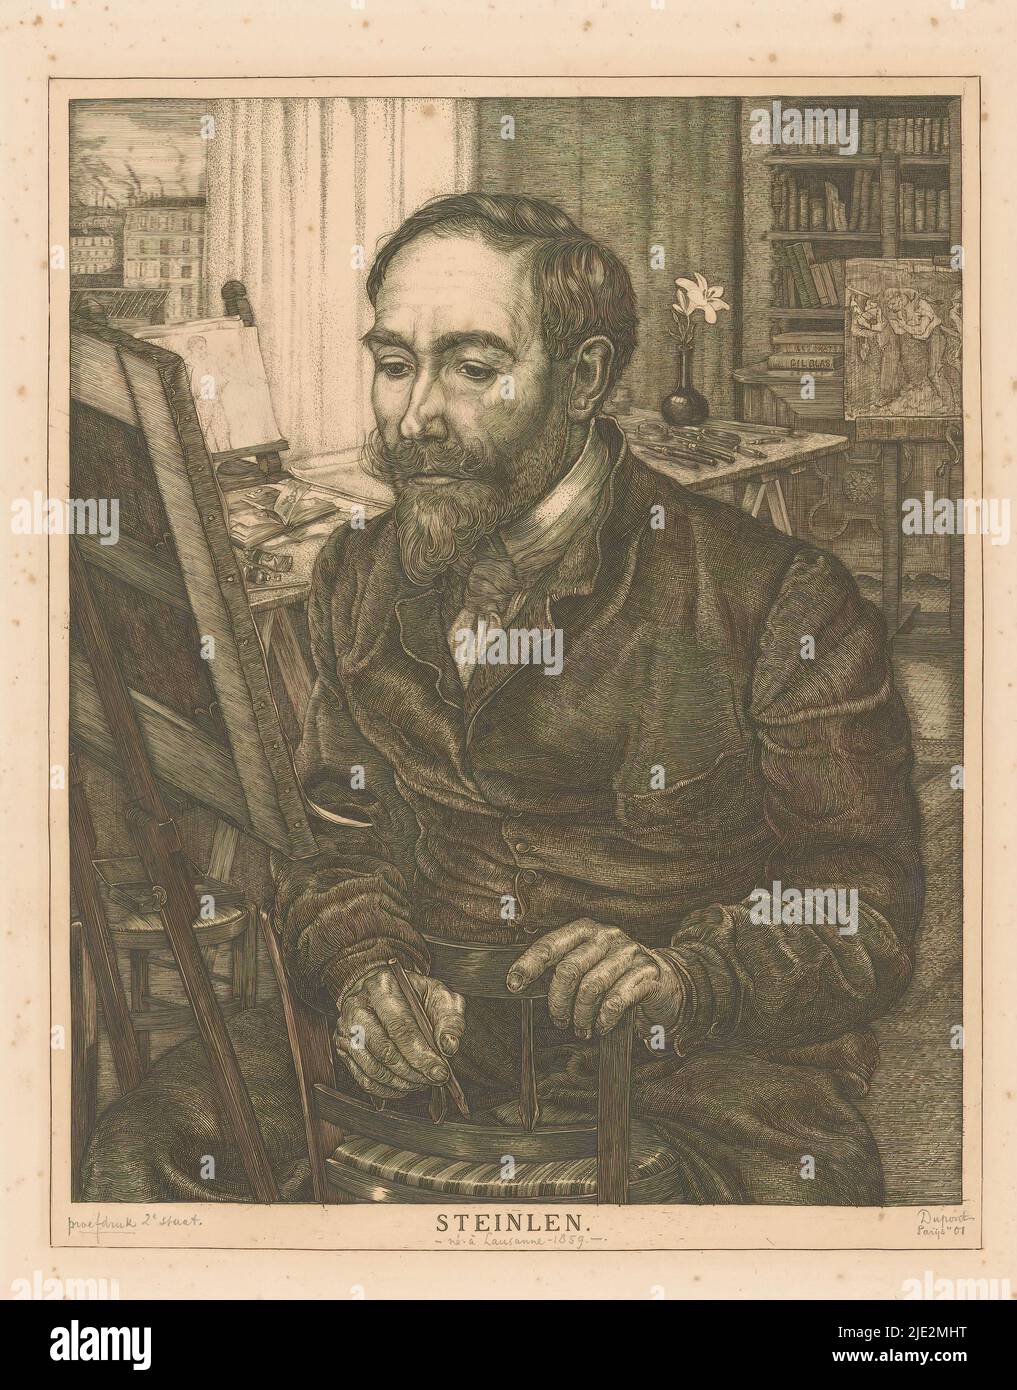 Portrait of Théophile Alexandre Steinlen, A portrait of the artist Théophile Alexandre Steinlen in his studio. Steinlen sits backwards on a chair near an easel. In the background a work table, a bookcase and through a window a view of Paris., print maker: Pieter Dupont, (signed by artist), Paris, 1901, paper, engraving, height 308 mm × width 246 mm Stock Photo